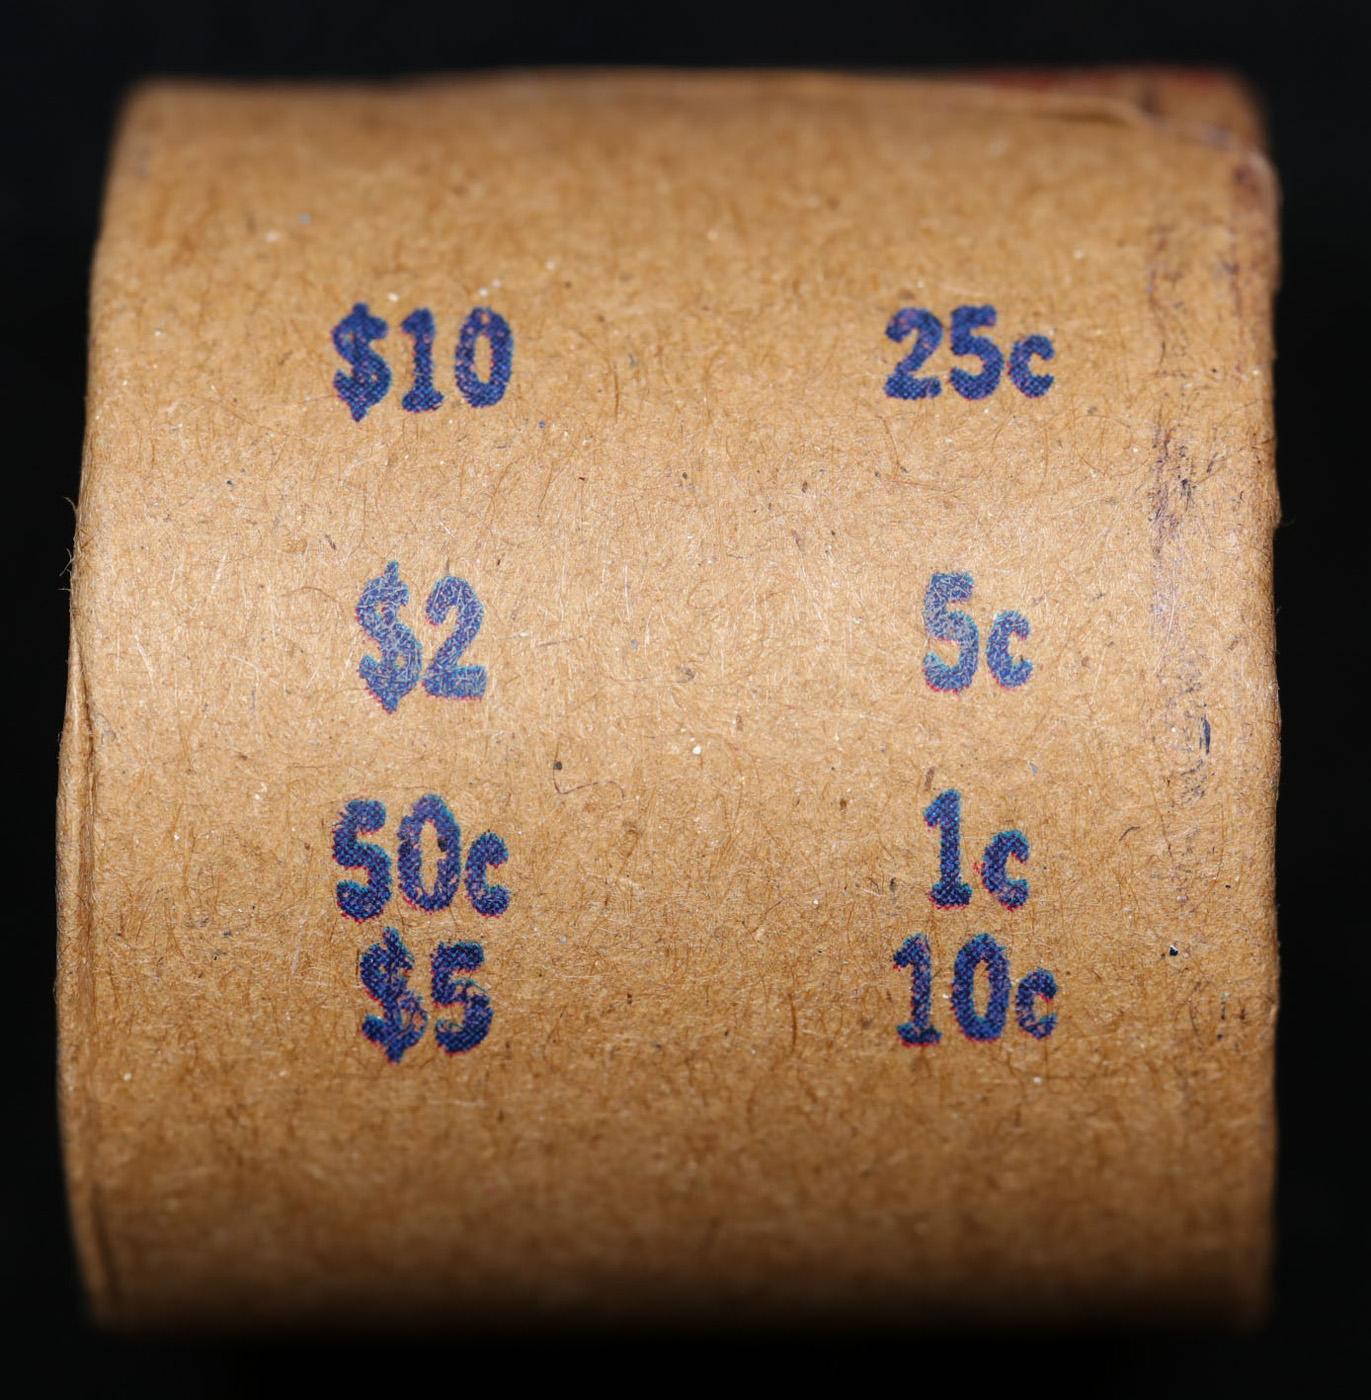 *EXCLUSIVE* Hand Marked " Morgan Premium," x10 coin Covered End Roll! - Huge Vault Hoard  (FC)